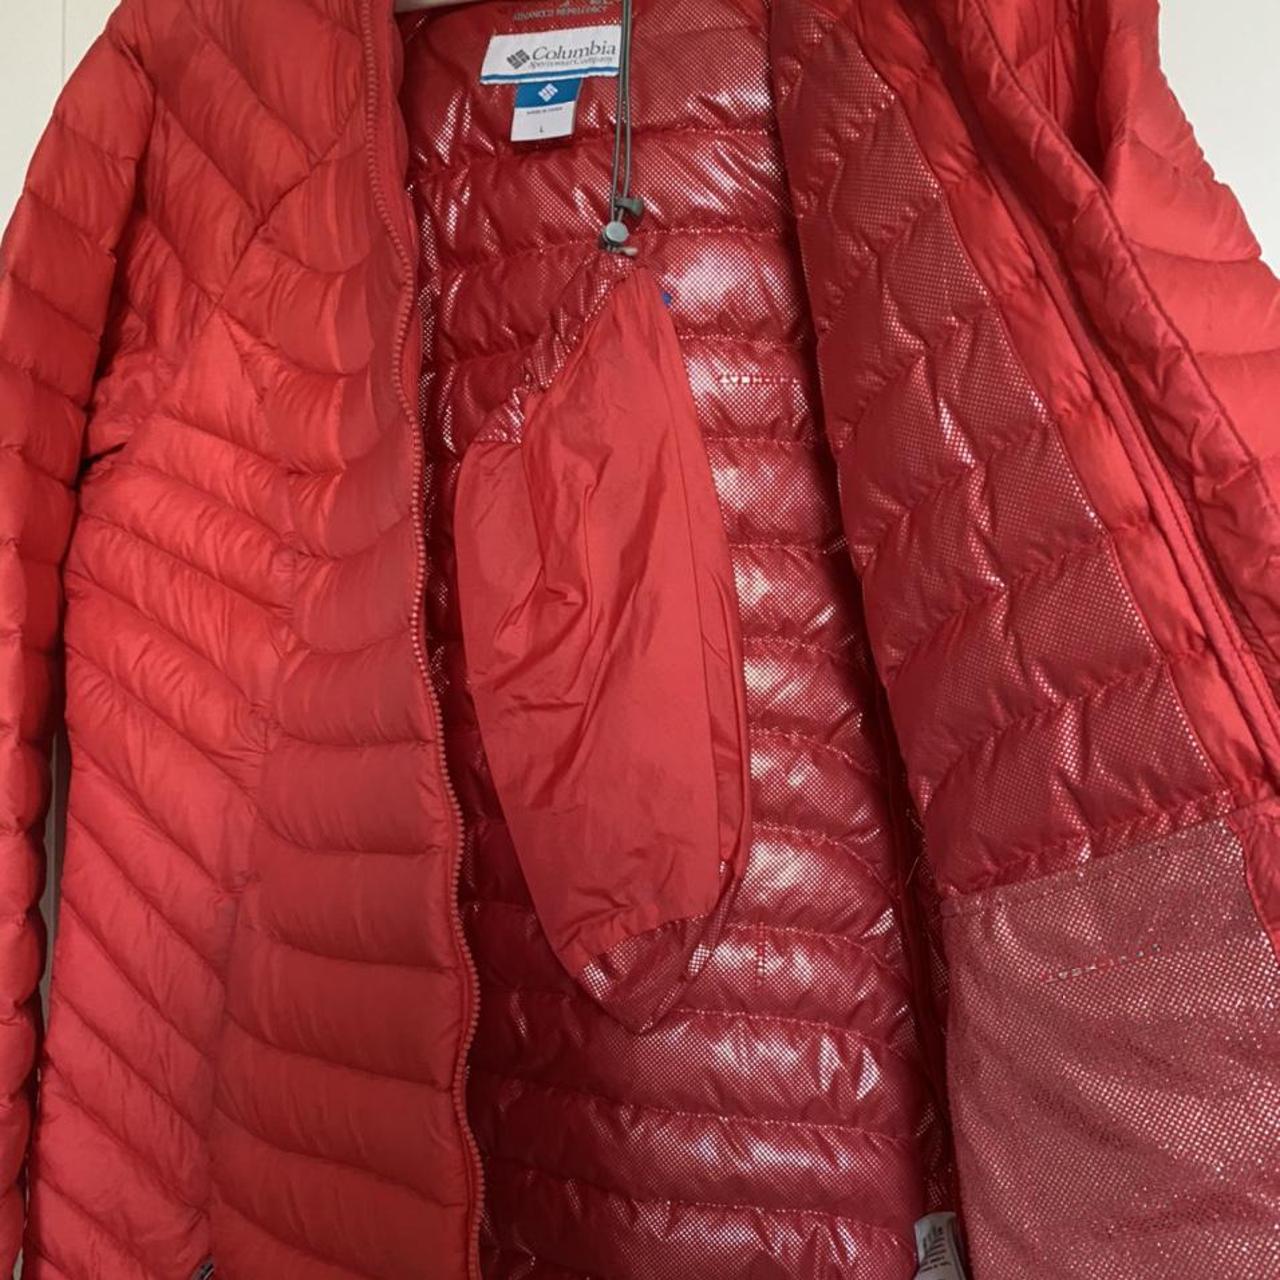 Product Image 2 - Columbia 800 fill down jacket.